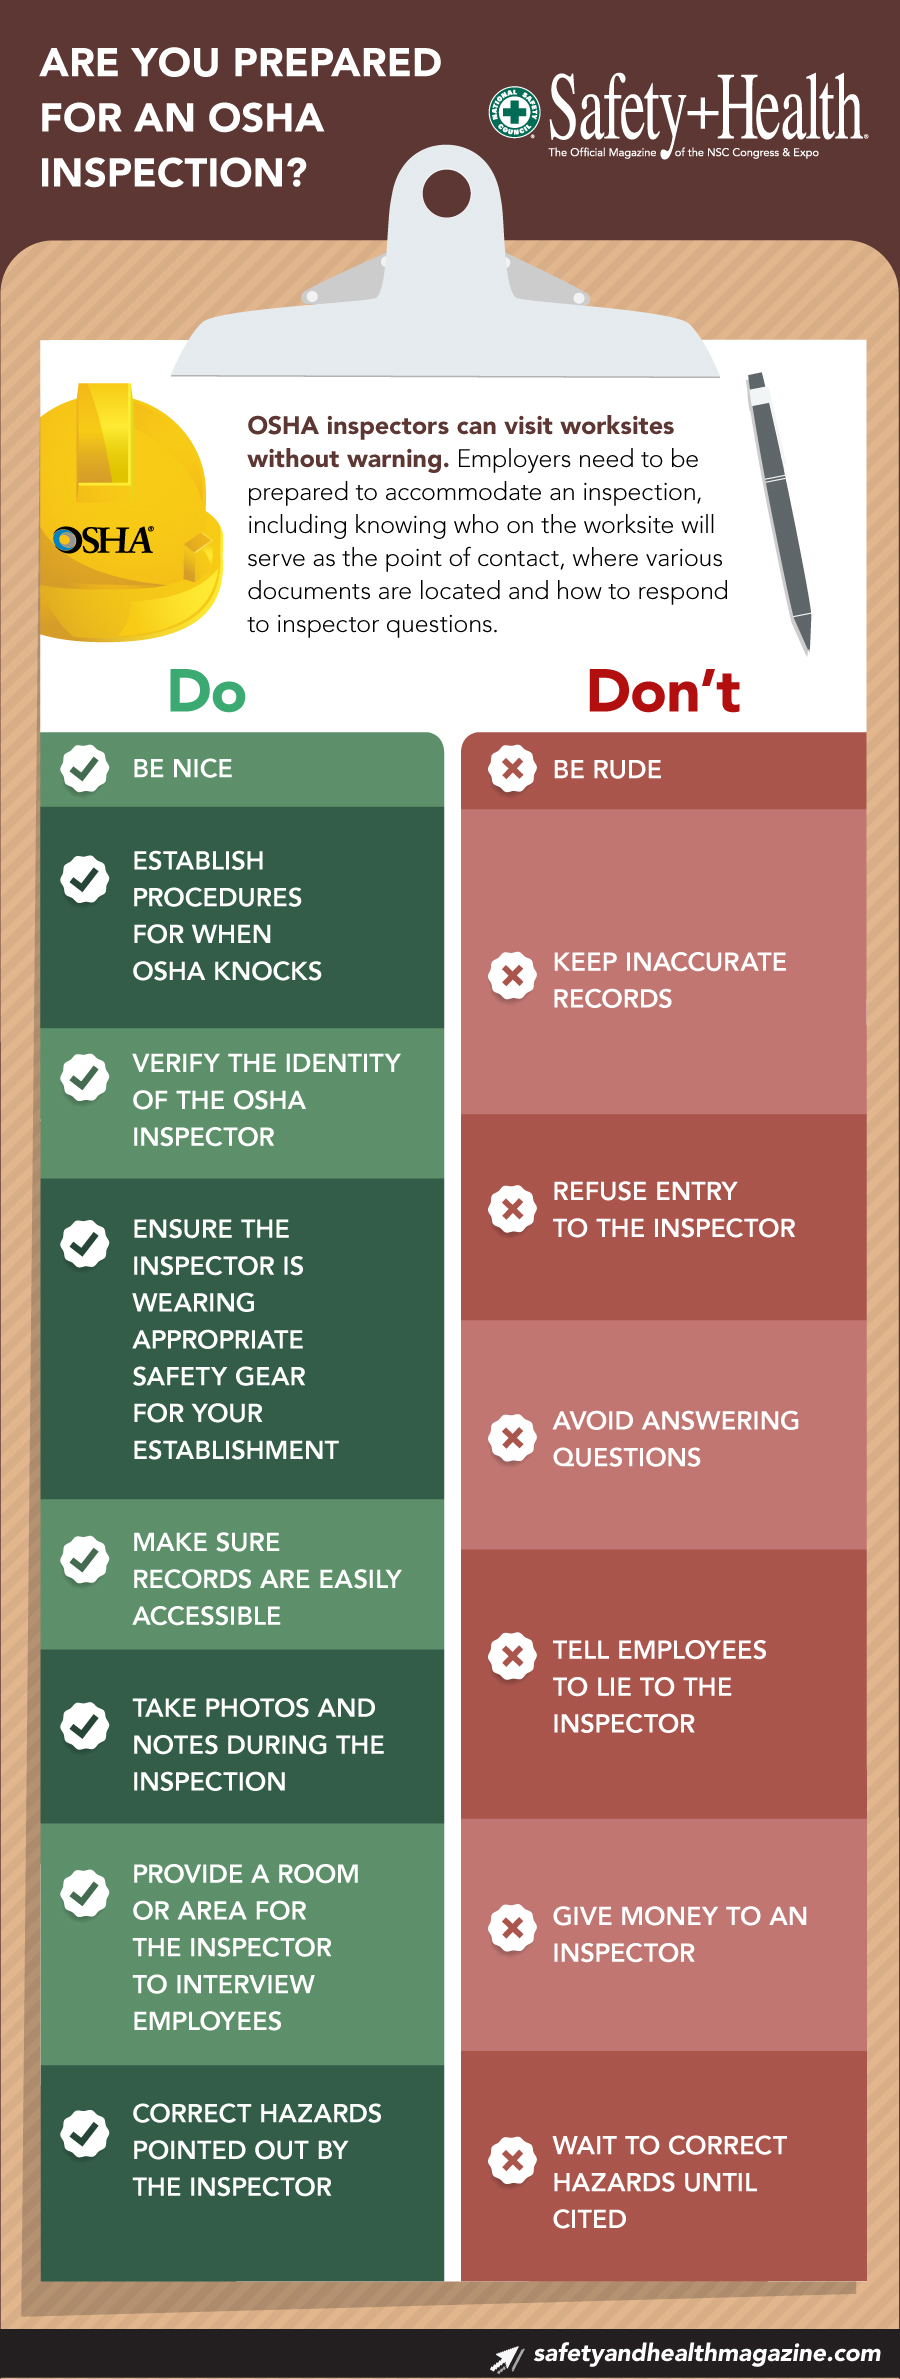 Preparing for an OSHA Inspection – Infographic